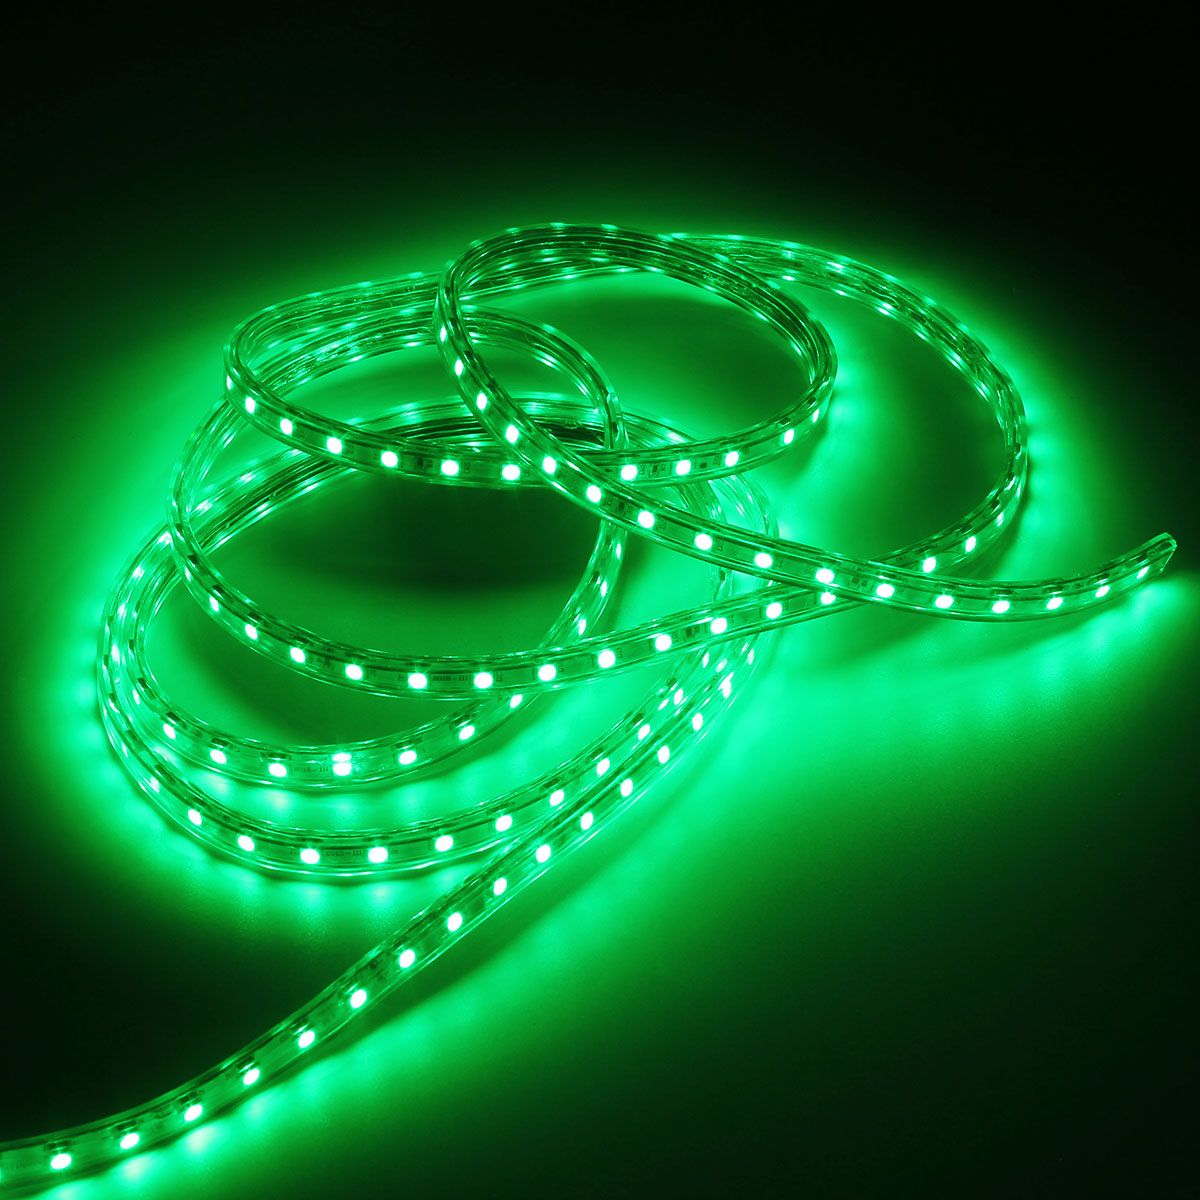 220V-3M-5050-LED-SMD-Outdoor-Waterproof-Flexible-Tape-Rope-Strip-Light-Xmas-1066318